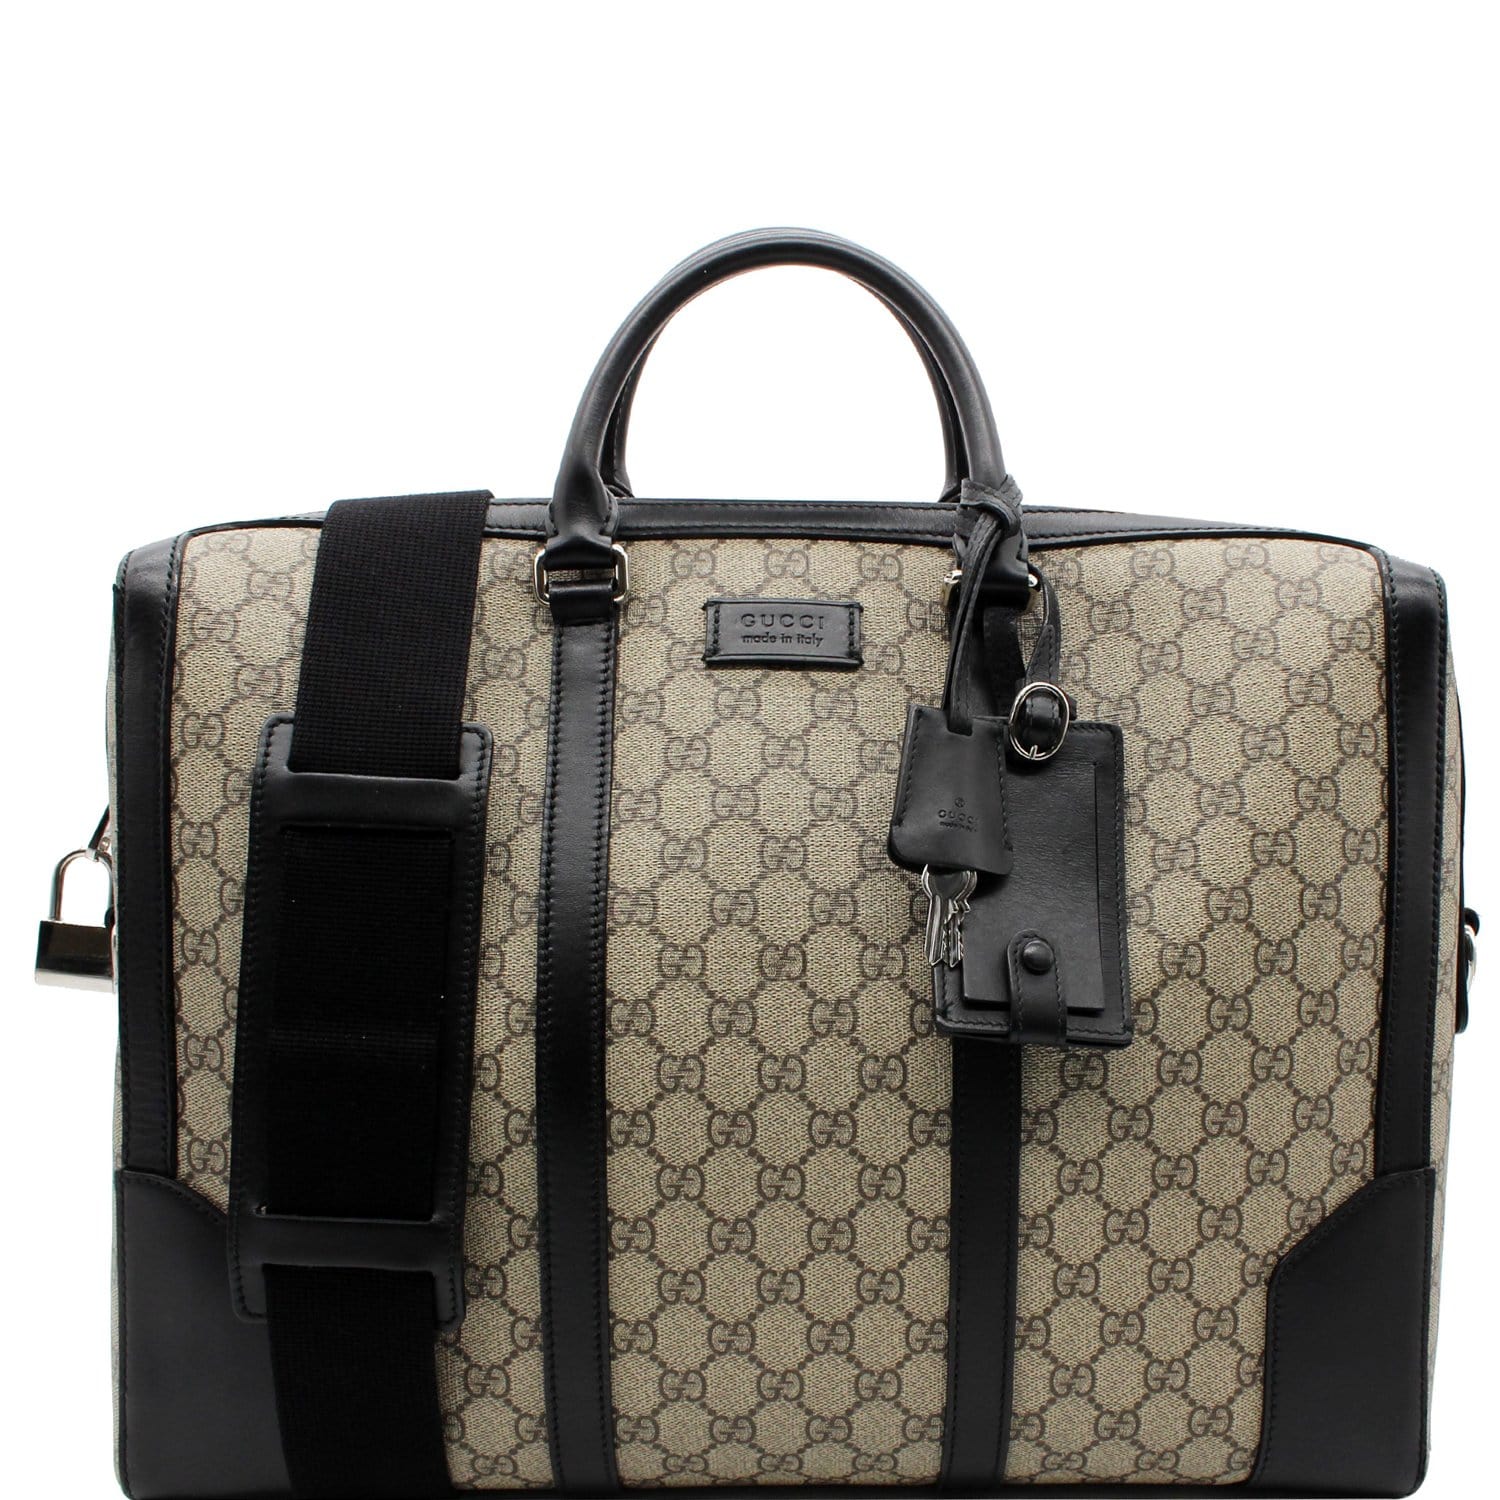 Ophidia large duffle bag in grey and black Supreme